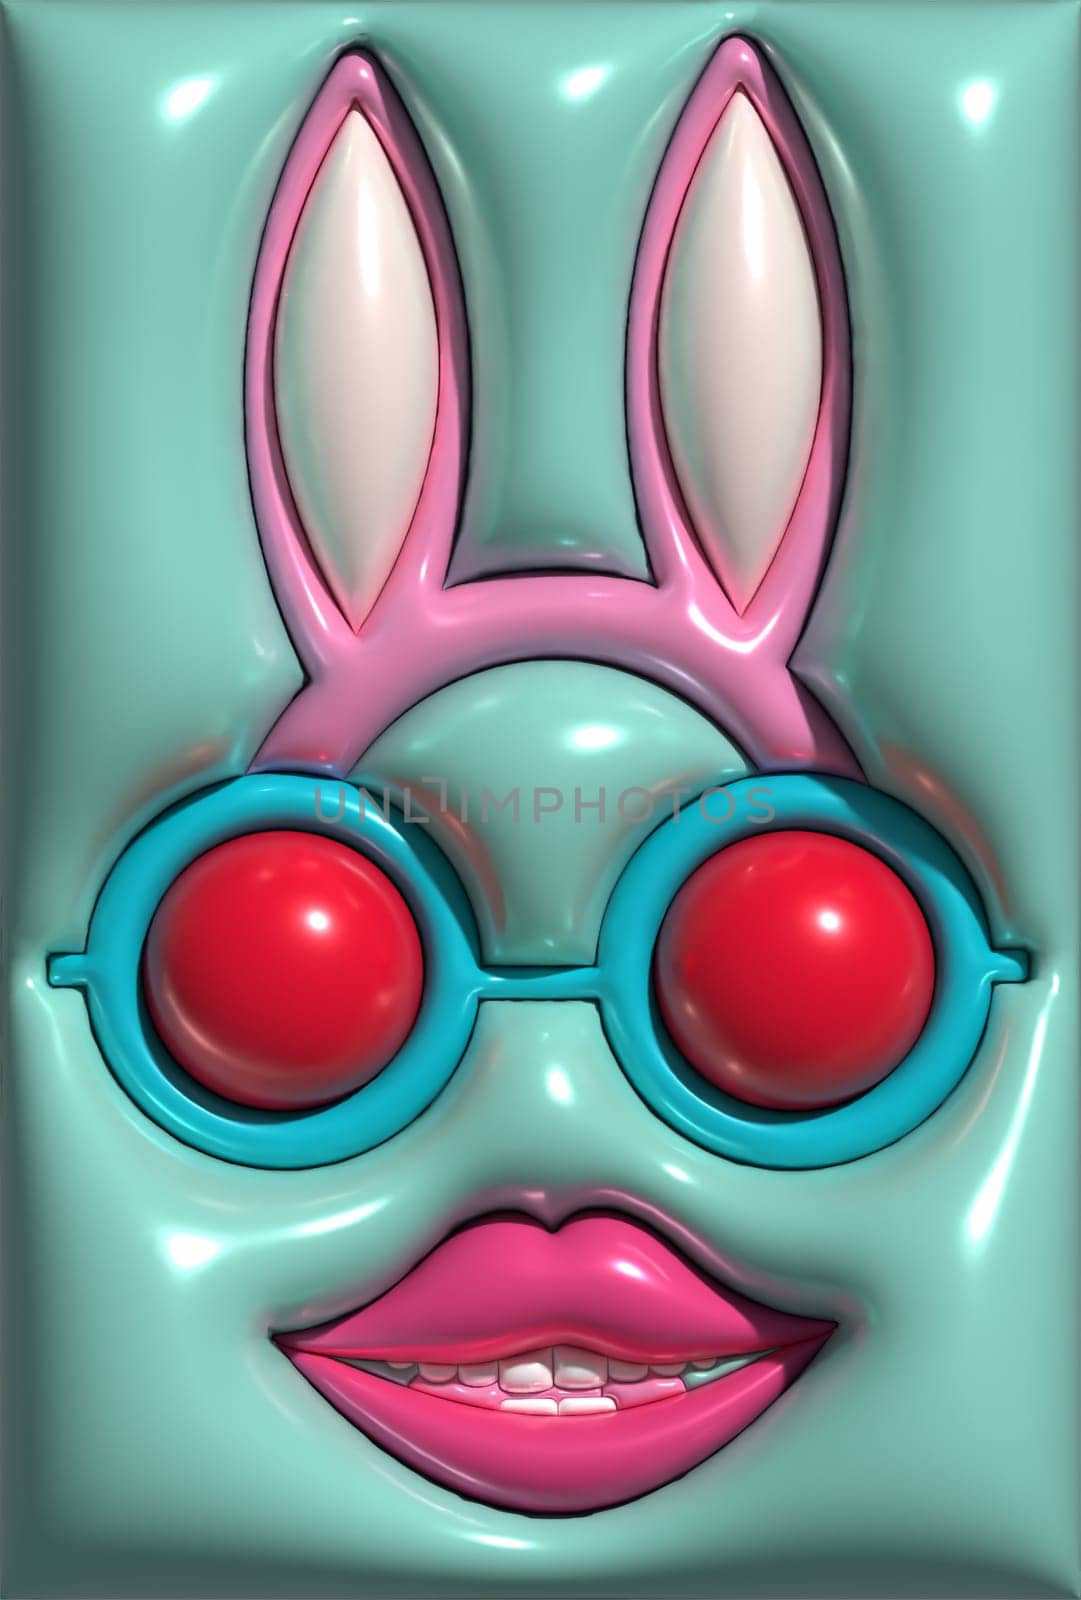 Character wearing glasses and a headband with ears and red lips, 3D rendering. illustration by ndanko